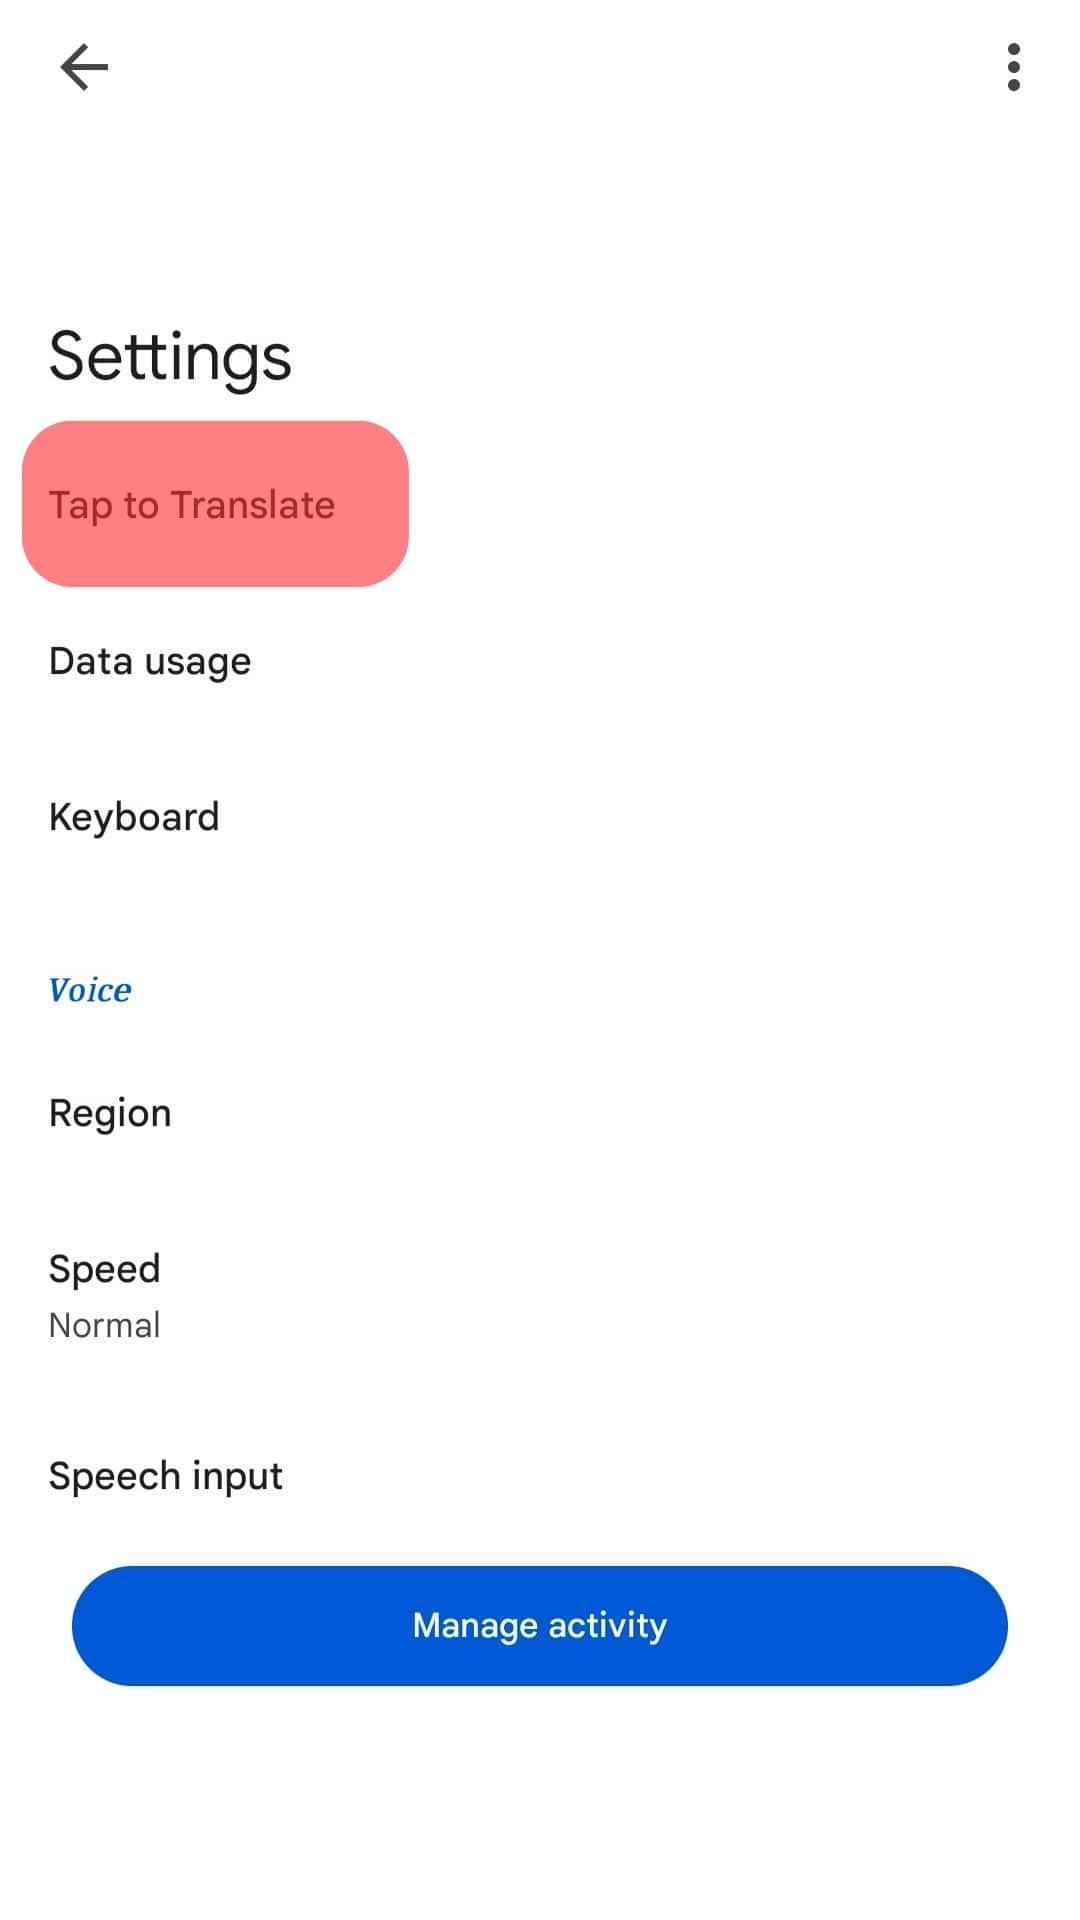 Click The Tap To Translate Option.